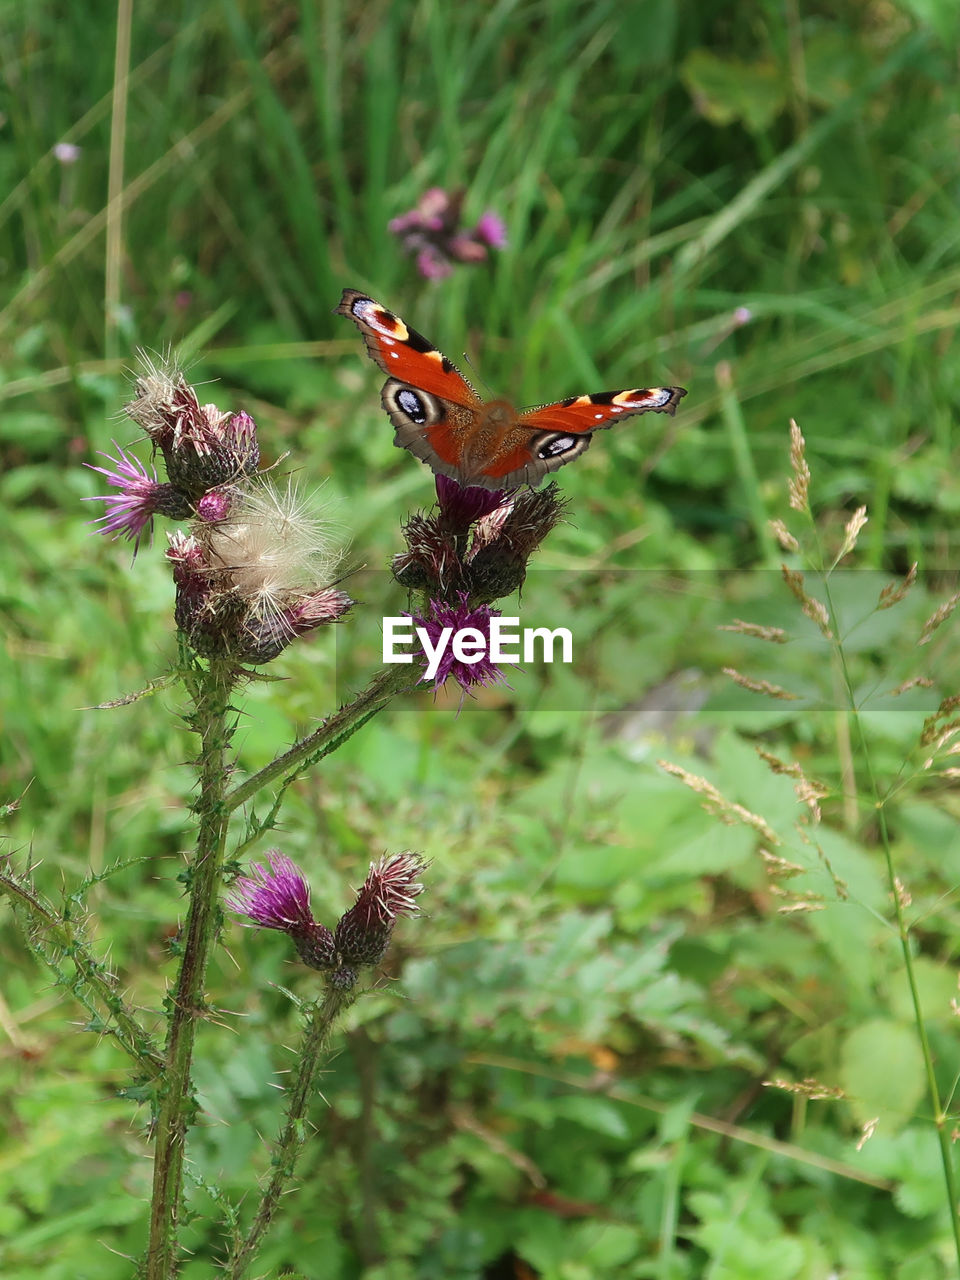 CLOSE-UP OF BUTTERFLY POLLINATING ON PURPLE FLOWERING PLANT